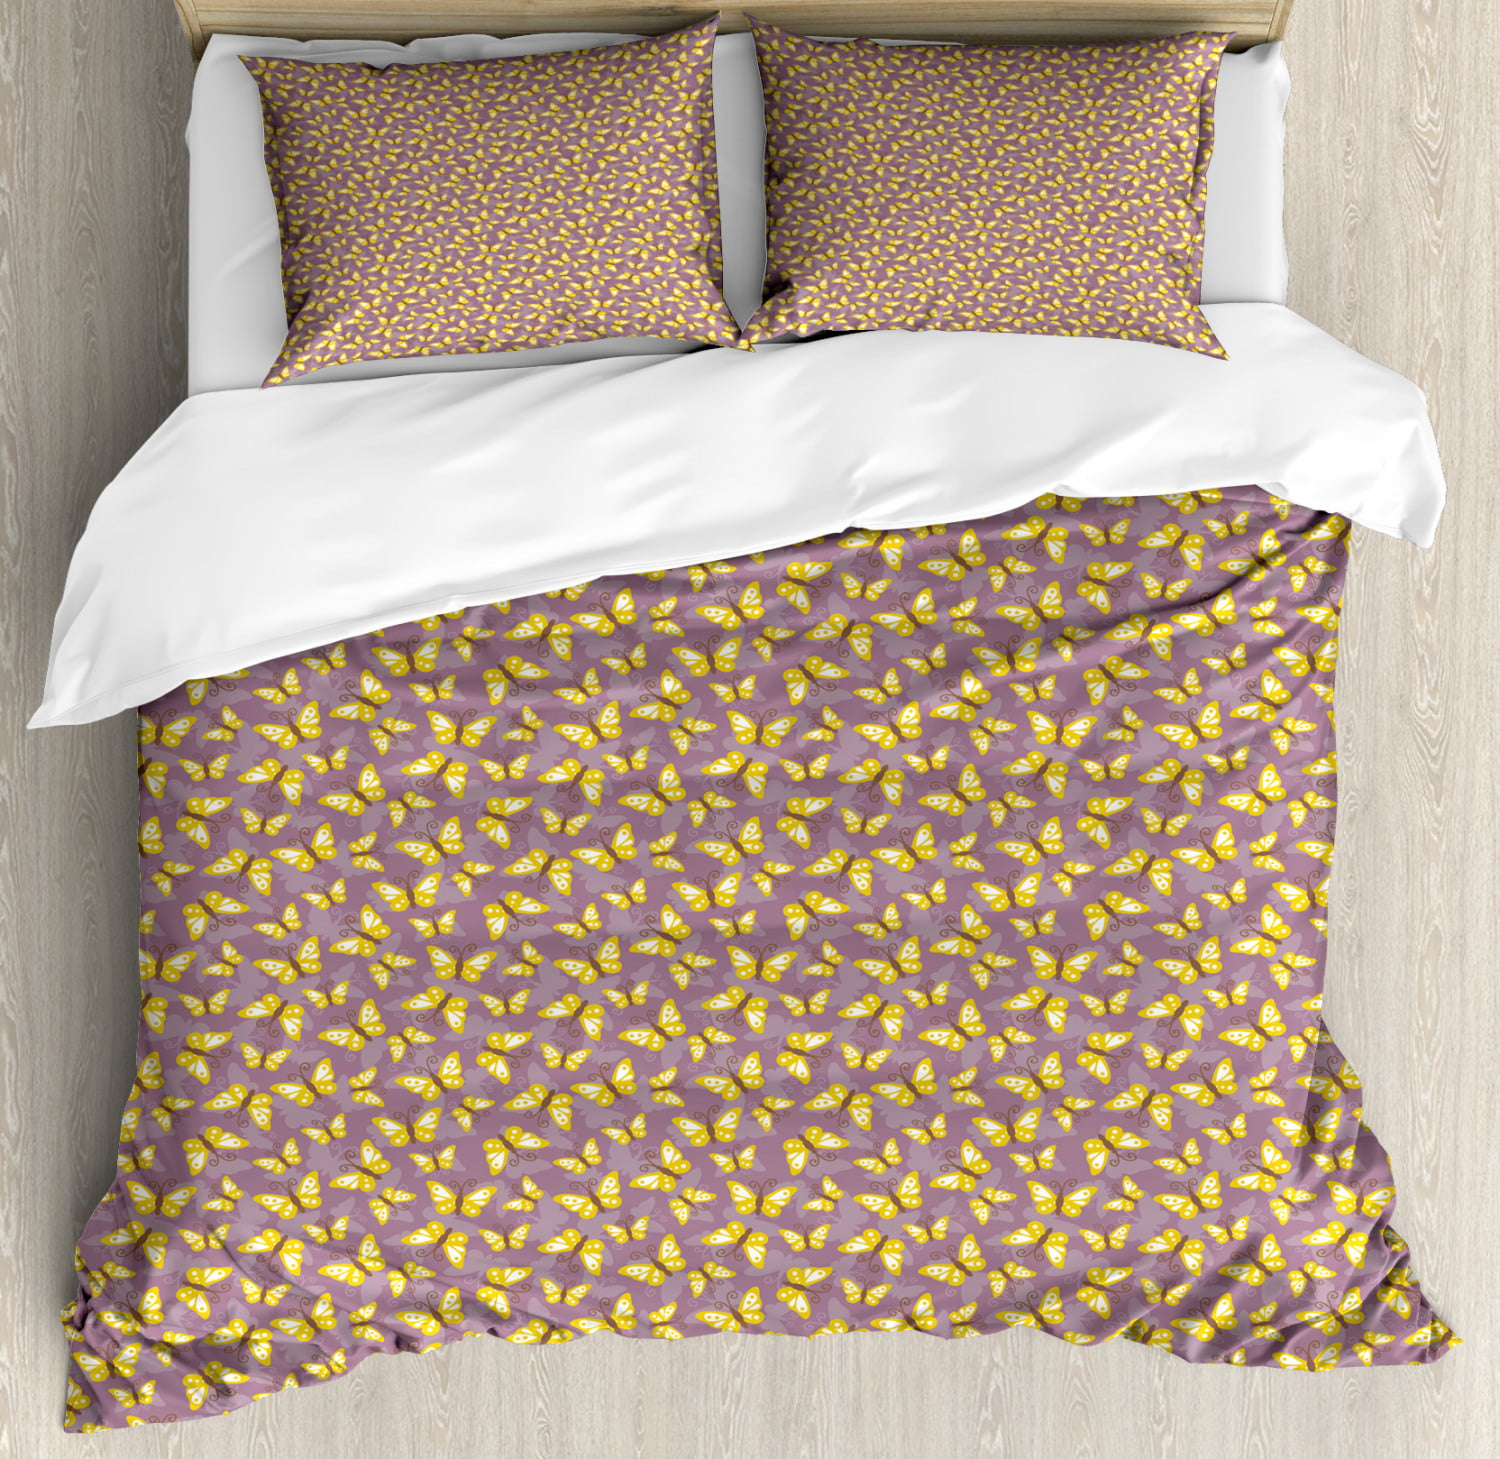 Butterfly Duvet Cover Set King Size Insects With Yellow And